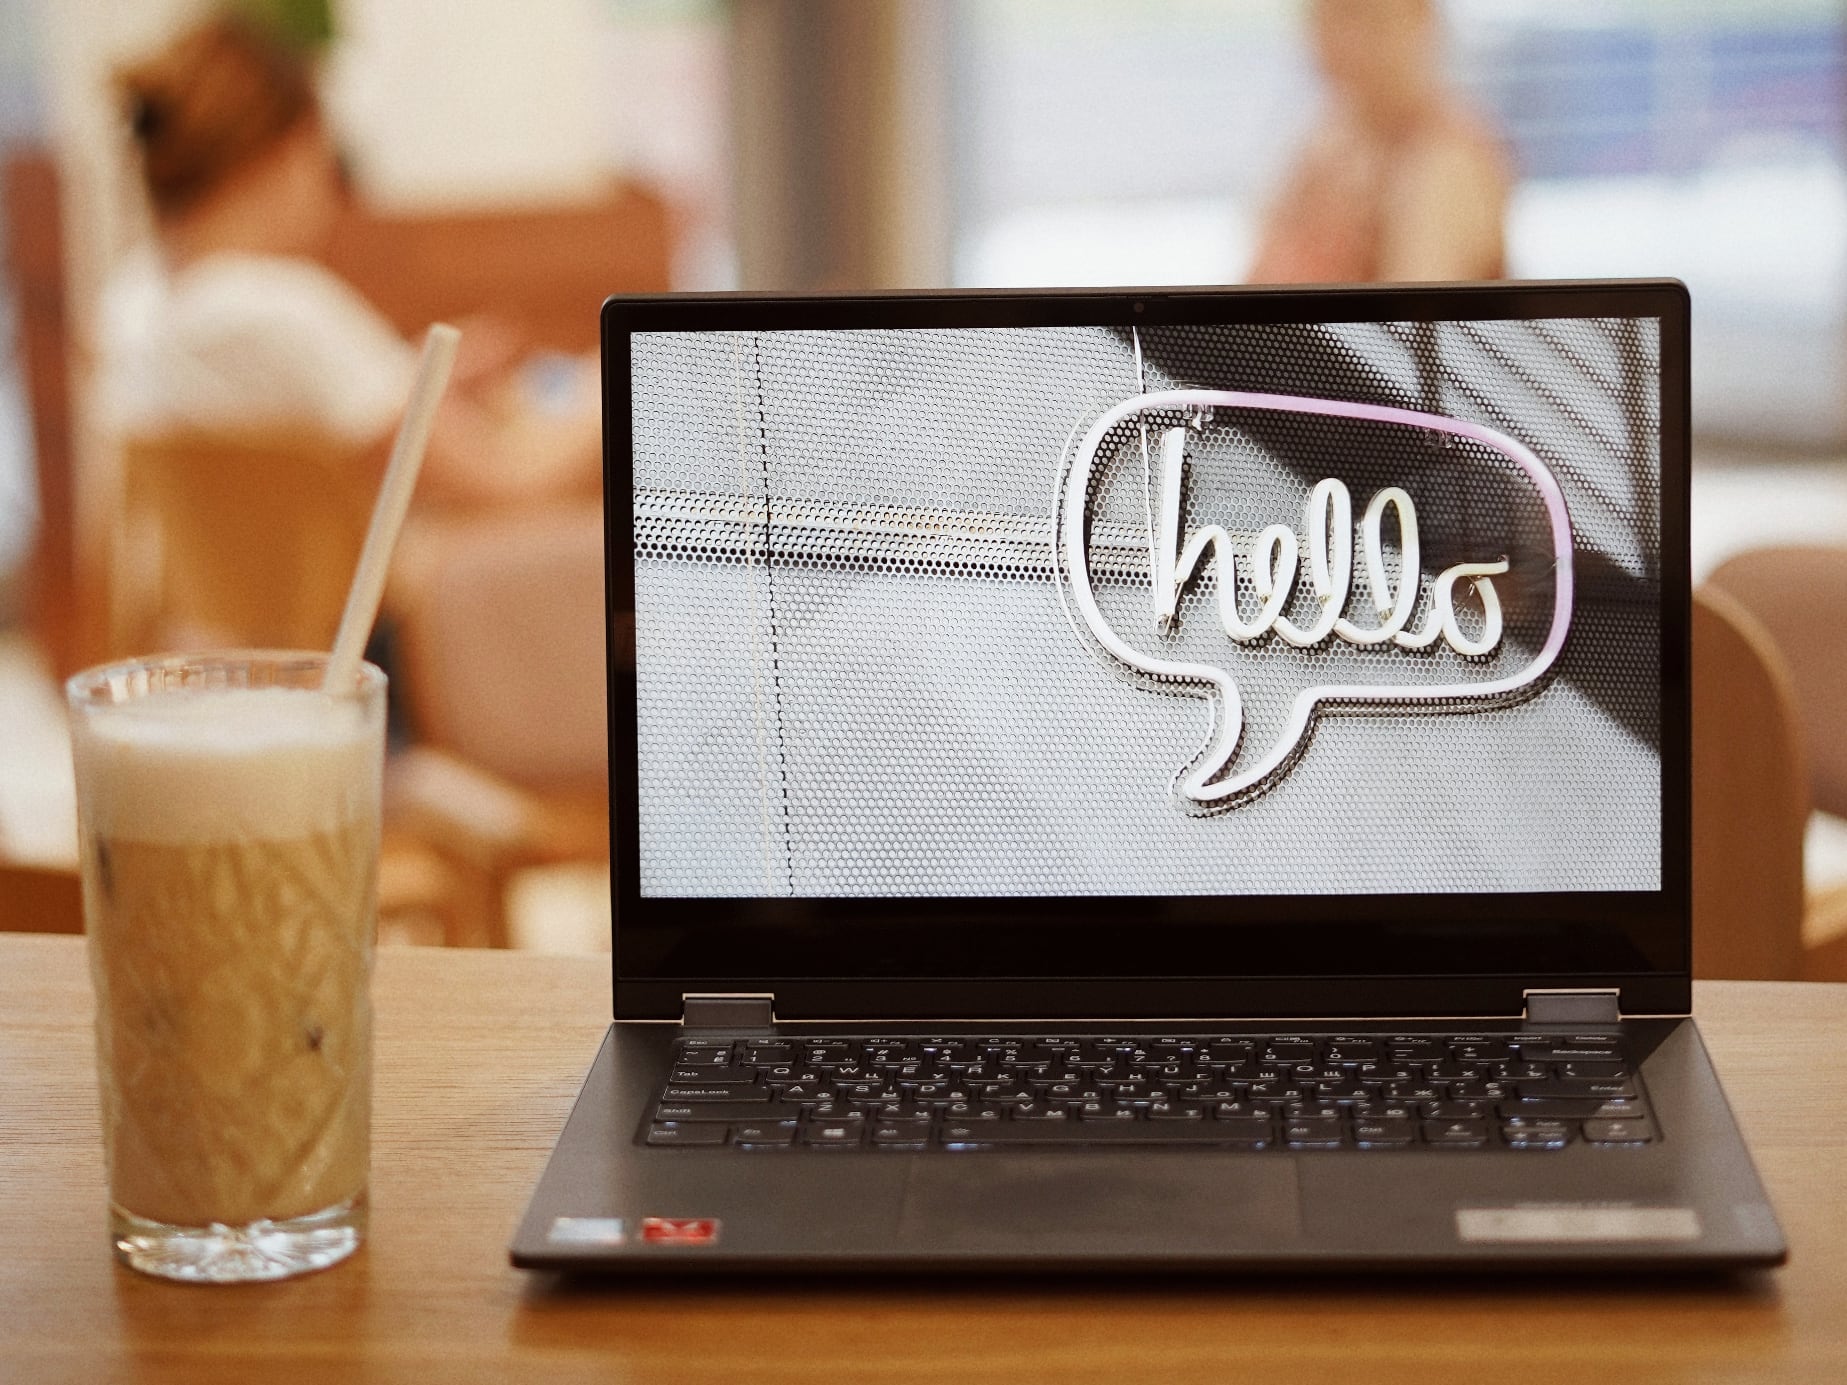 Laptop on desk with glass of cold coffee. Wallpaper of an LED sign saying Hello